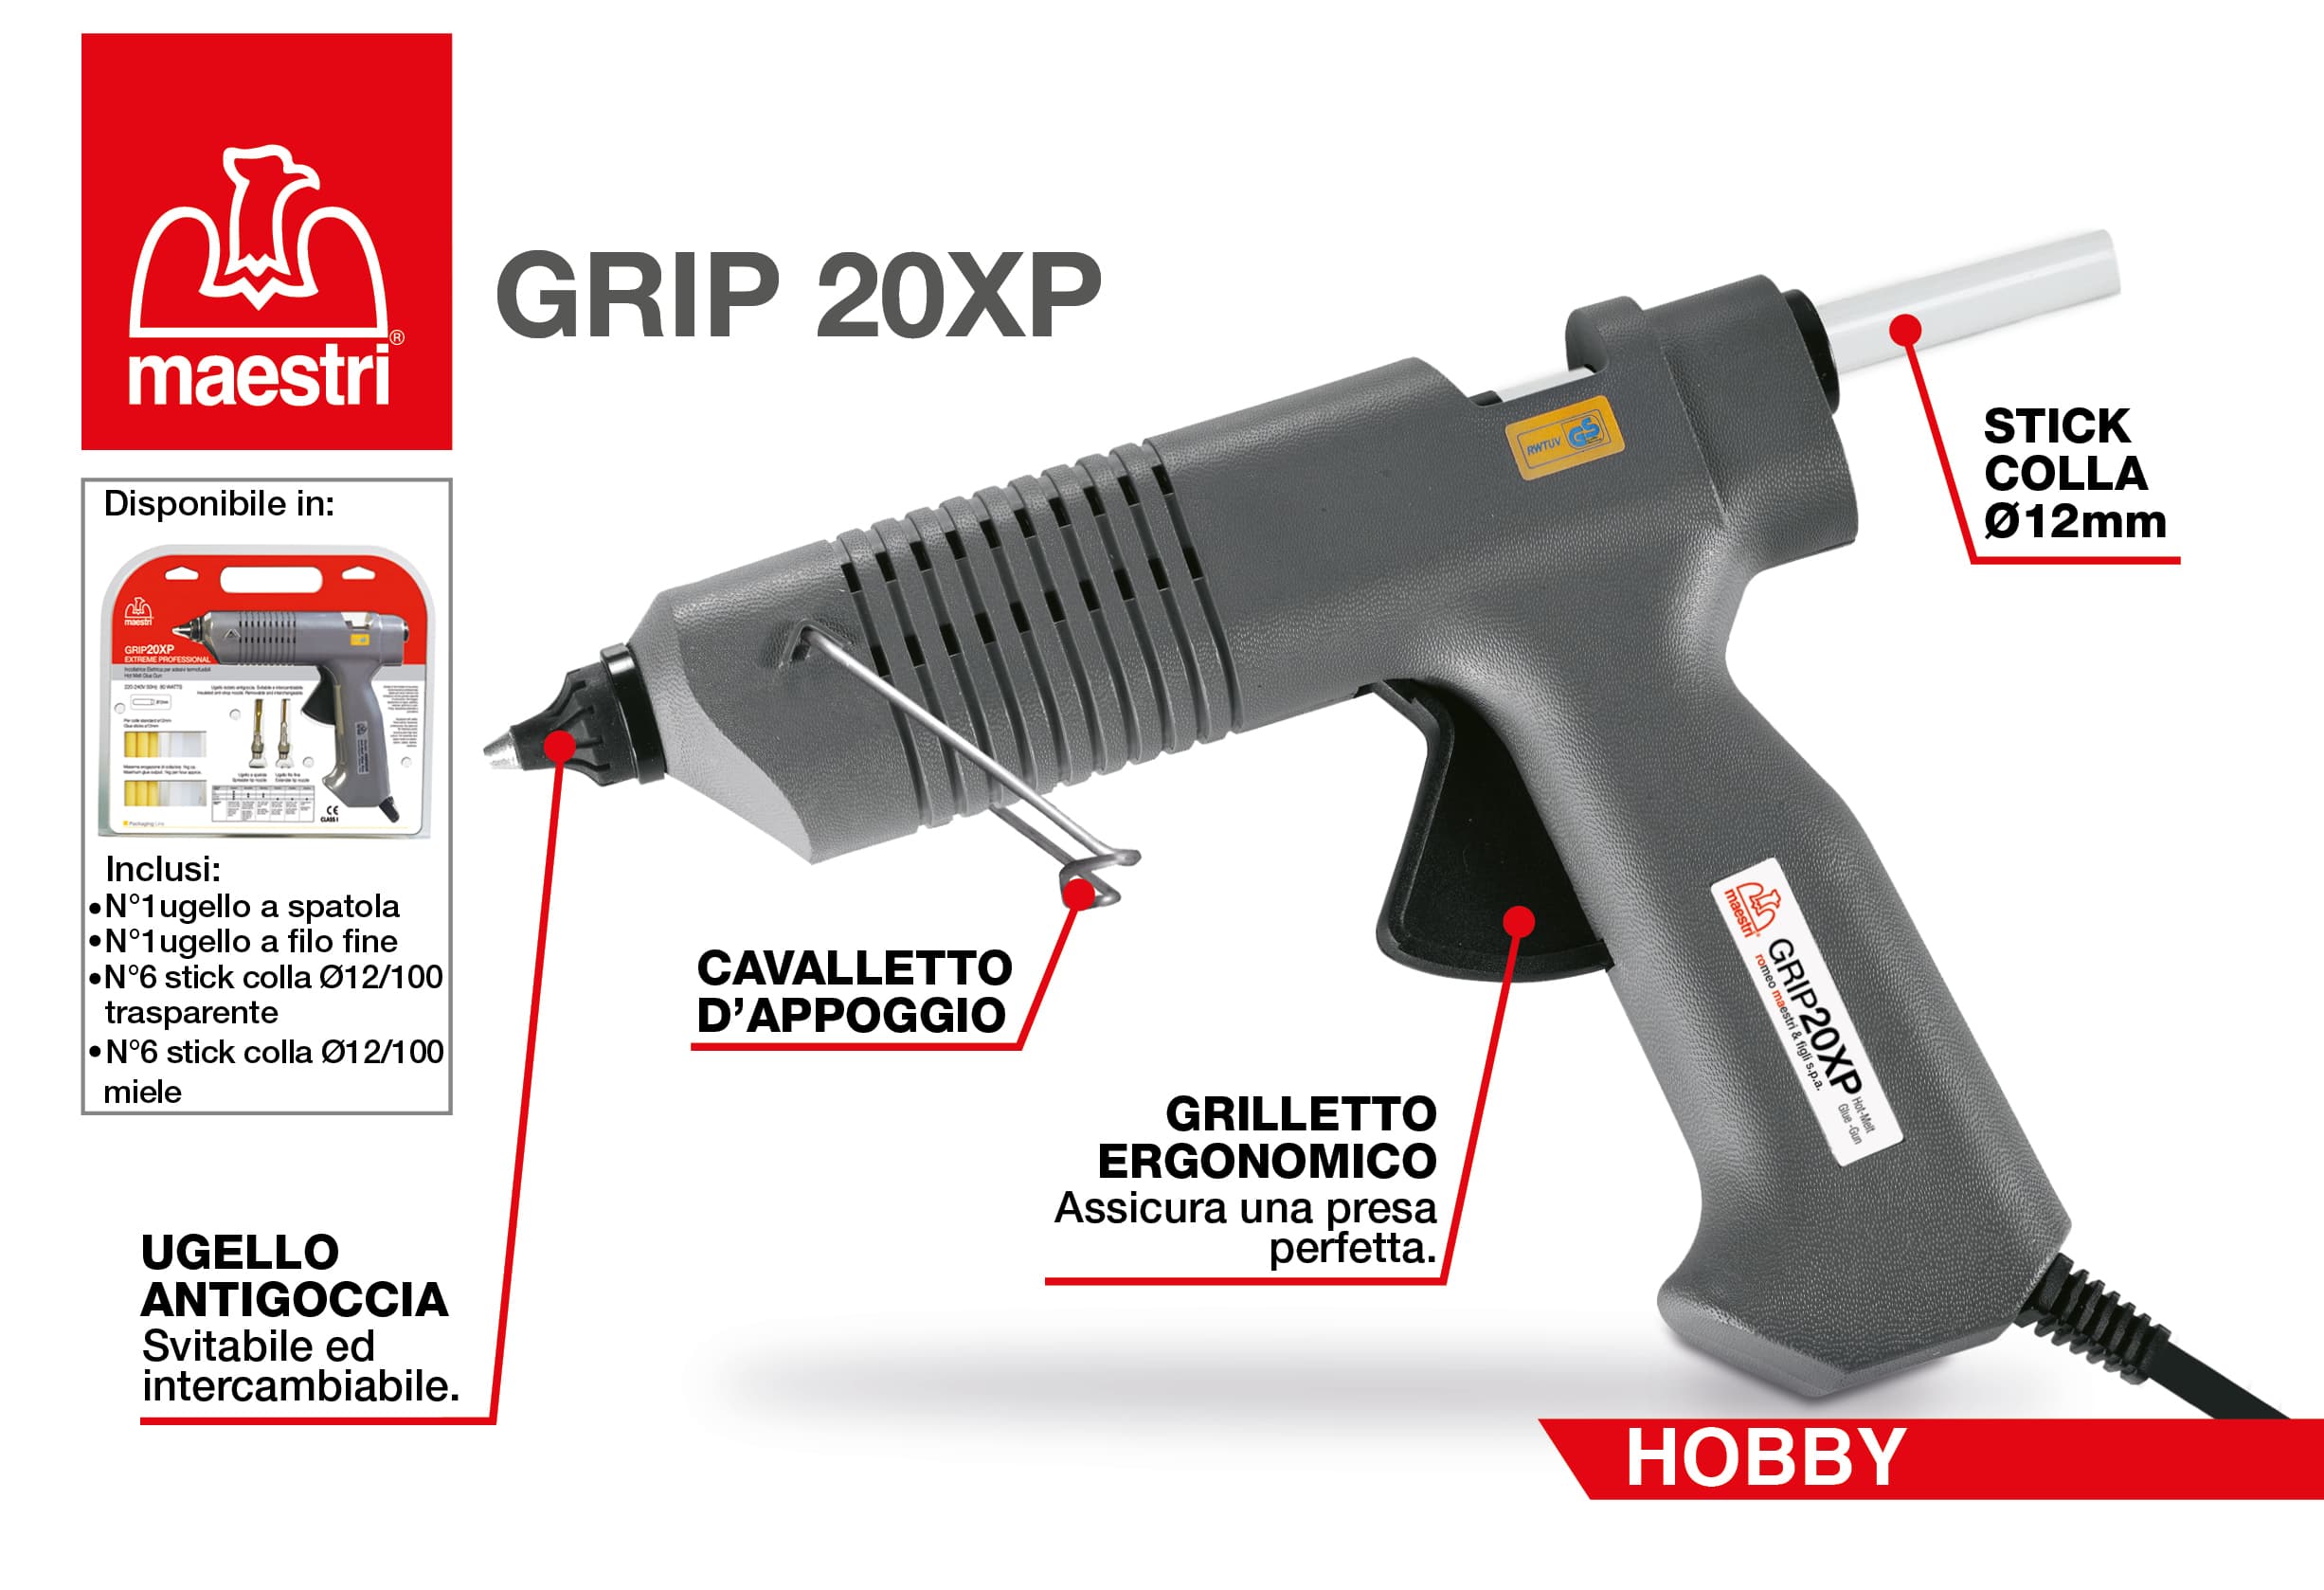 New line electric glue gun for hot melt adhesives